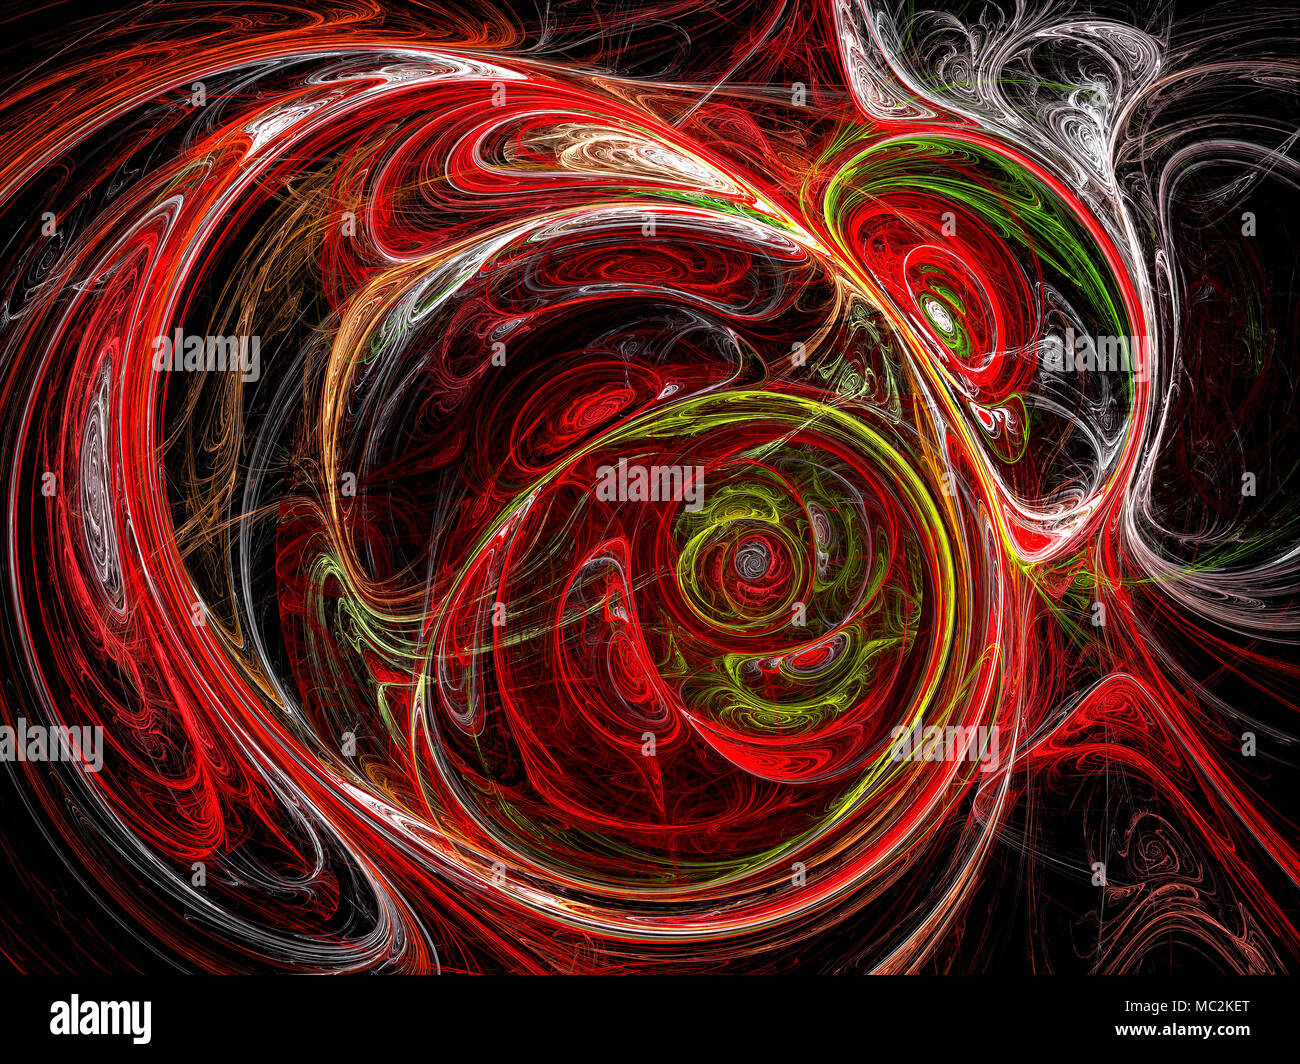 Chaos curves - abstract digitally generated image Stock Photo